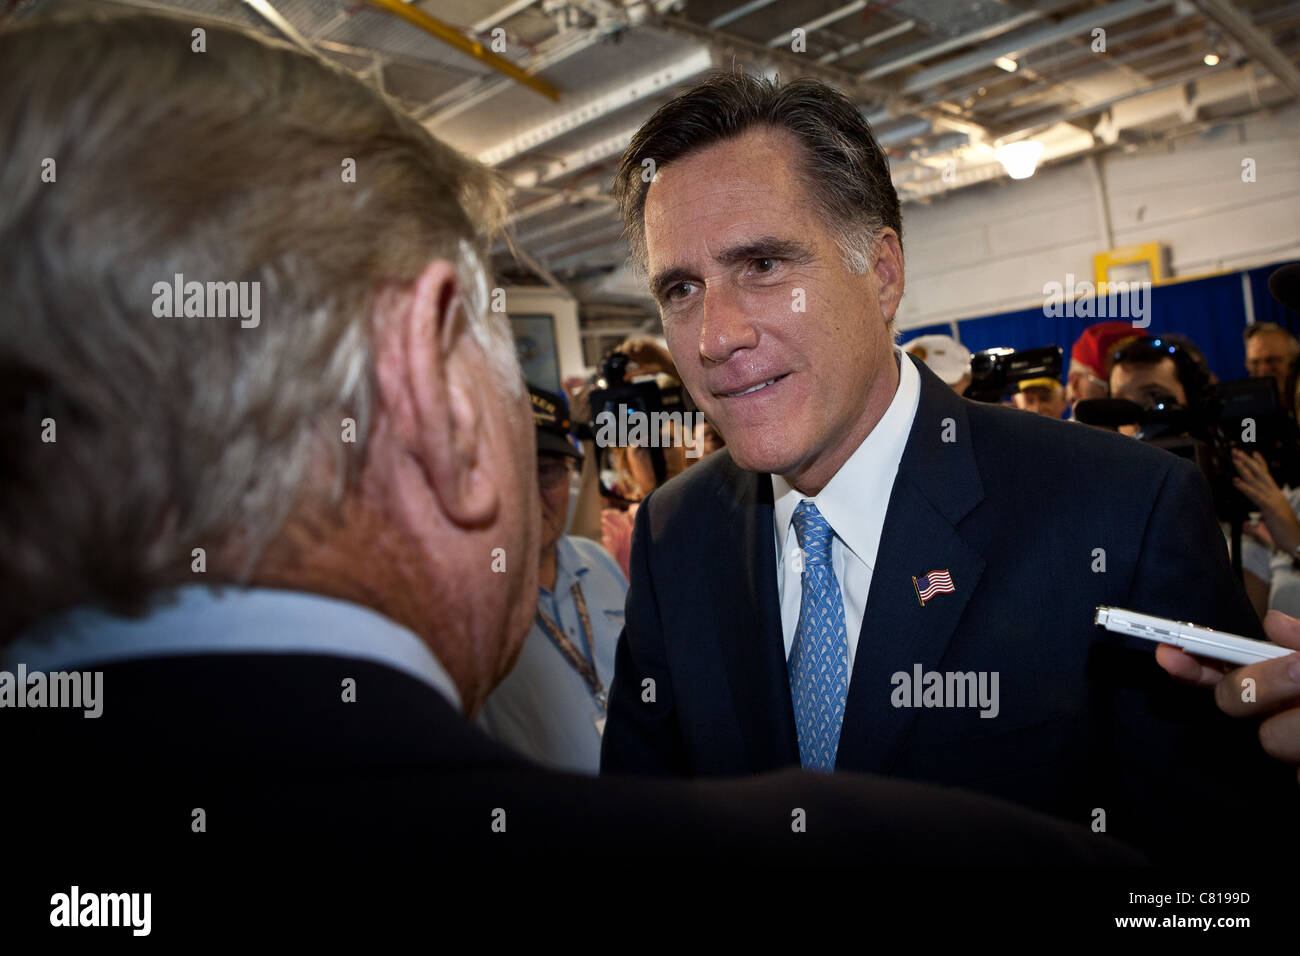 Republican presidential candidate Mitt Romney greets military veterans during a visit to the aircraft carrier USS Yorktown museu Stock Photo